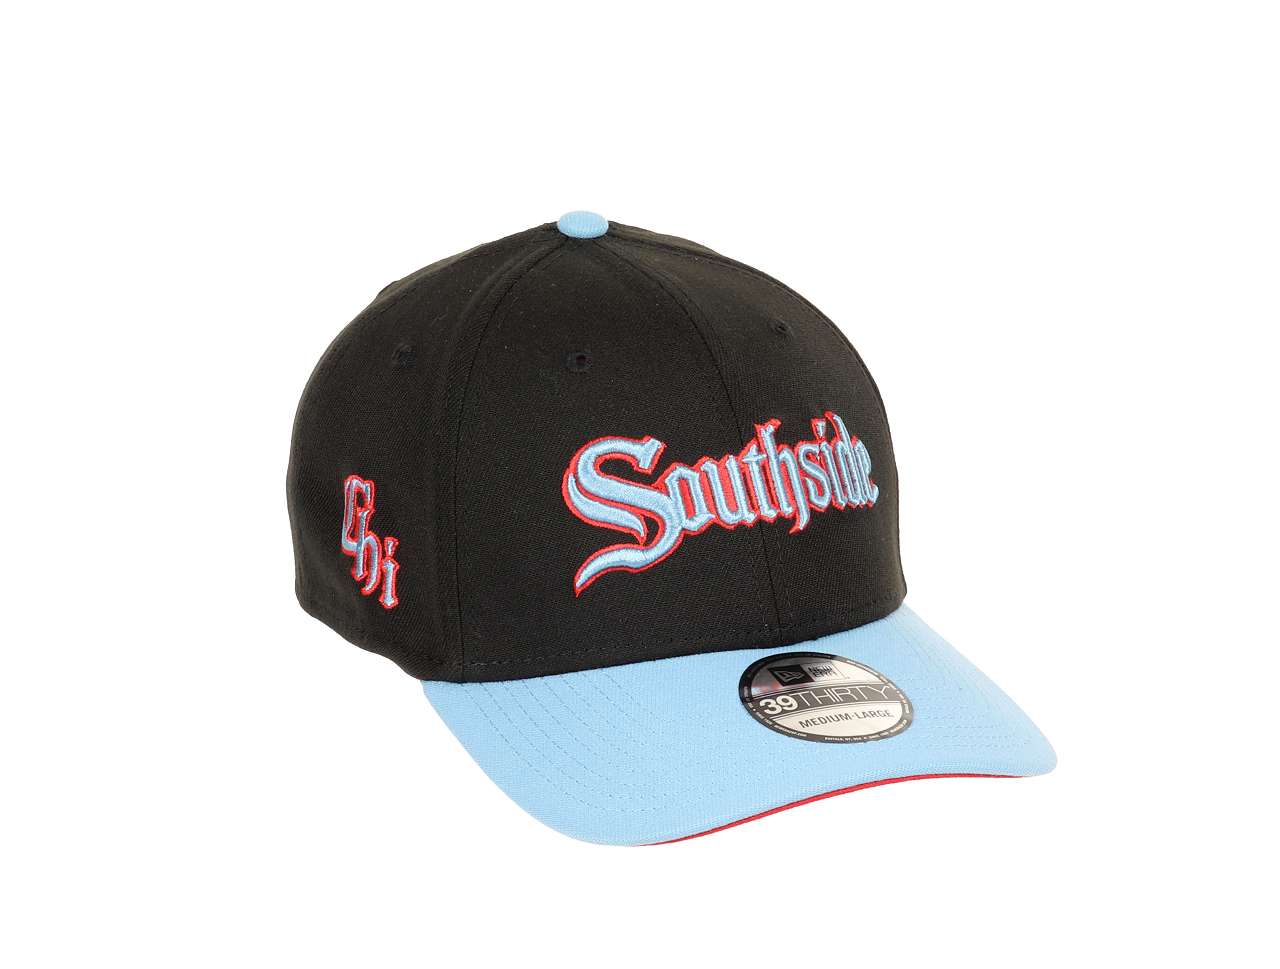 Chicago White Sox MLB Chicago Sidepatch Two Tone Black Blue 39Thirty Stretch Cap New Era